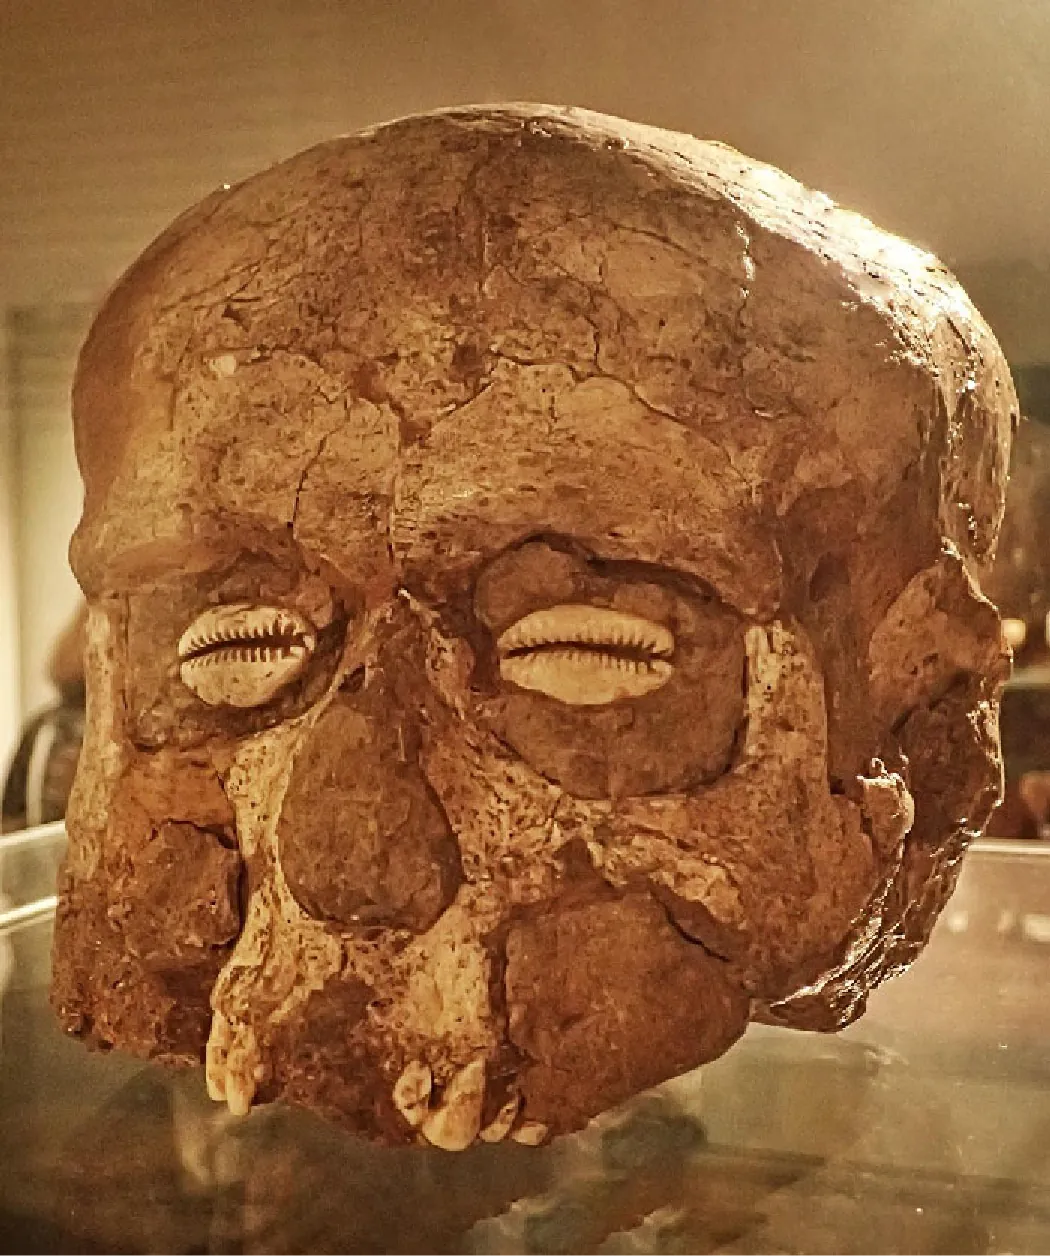 A picture of a brown, cracked skull on a glass surface is shown. Beige walls can be seen in the background. The top of the skull is in one piece, but cracks show all over. Almond shaped beige shells show in the eye sockets. Brownish-beige clay is shown in the nose hole, cheeks, ear holes, as well as in the top part of the jaw. Six teeth are showing in the upper half of the skull. No bottom jaw is shown.